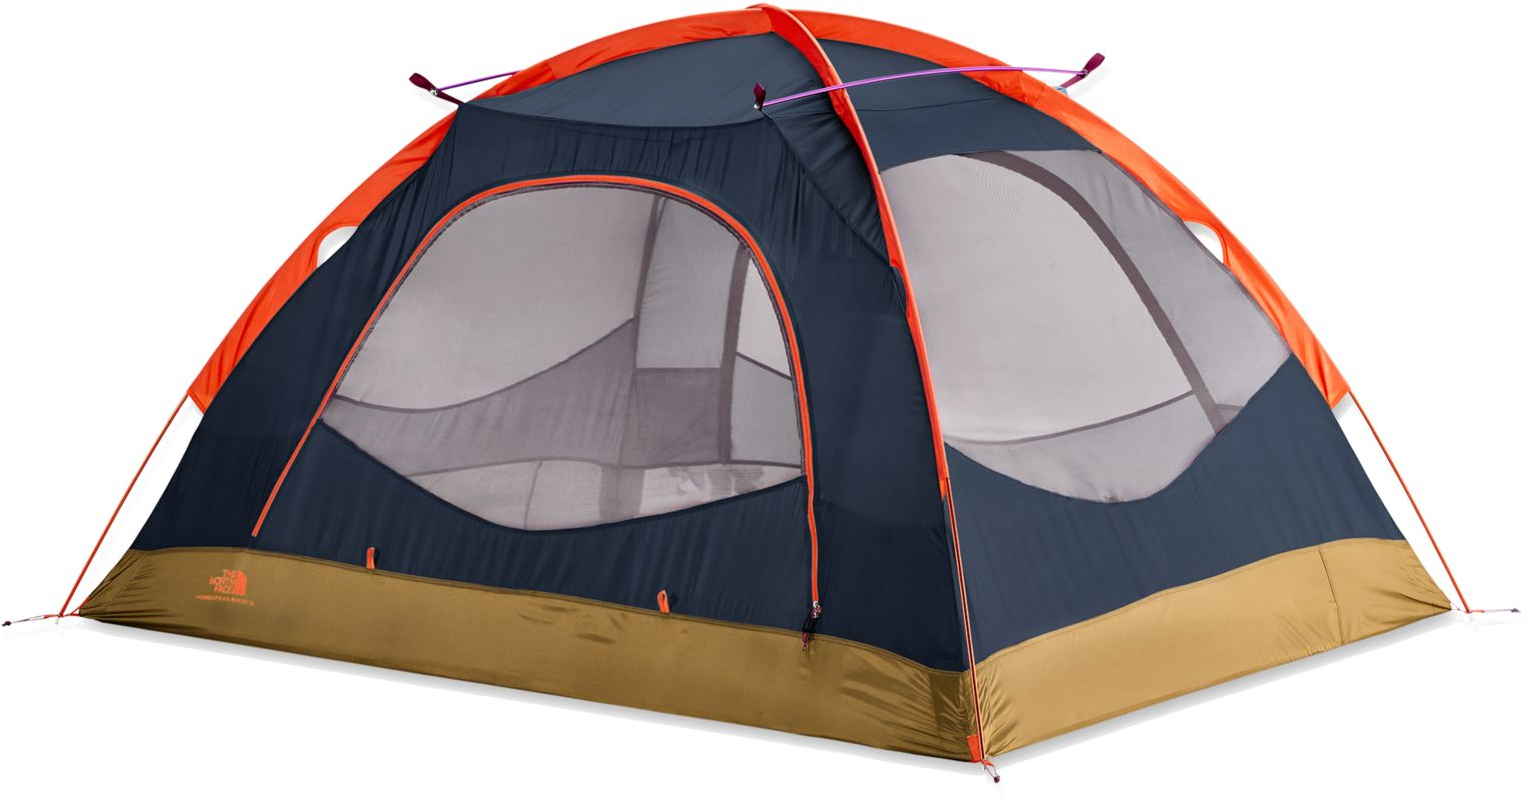 Homestead Roomy 2 Tent - The North Face 